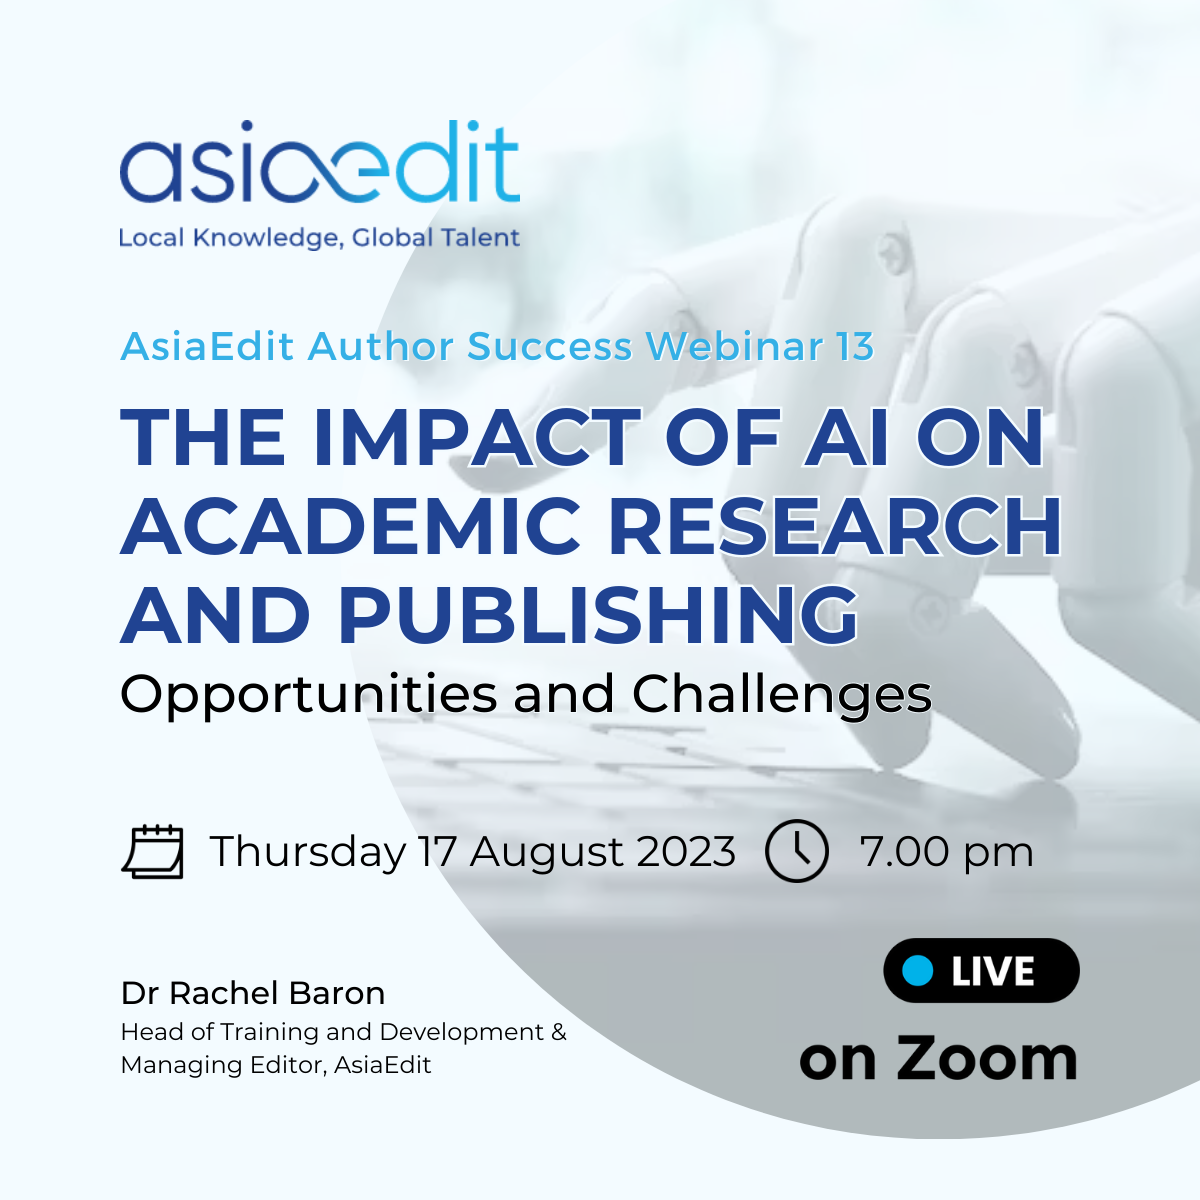 AsiaEdit Webinar - The Impact of AI on Academic Research and Publishing: Opportunities and Challenges